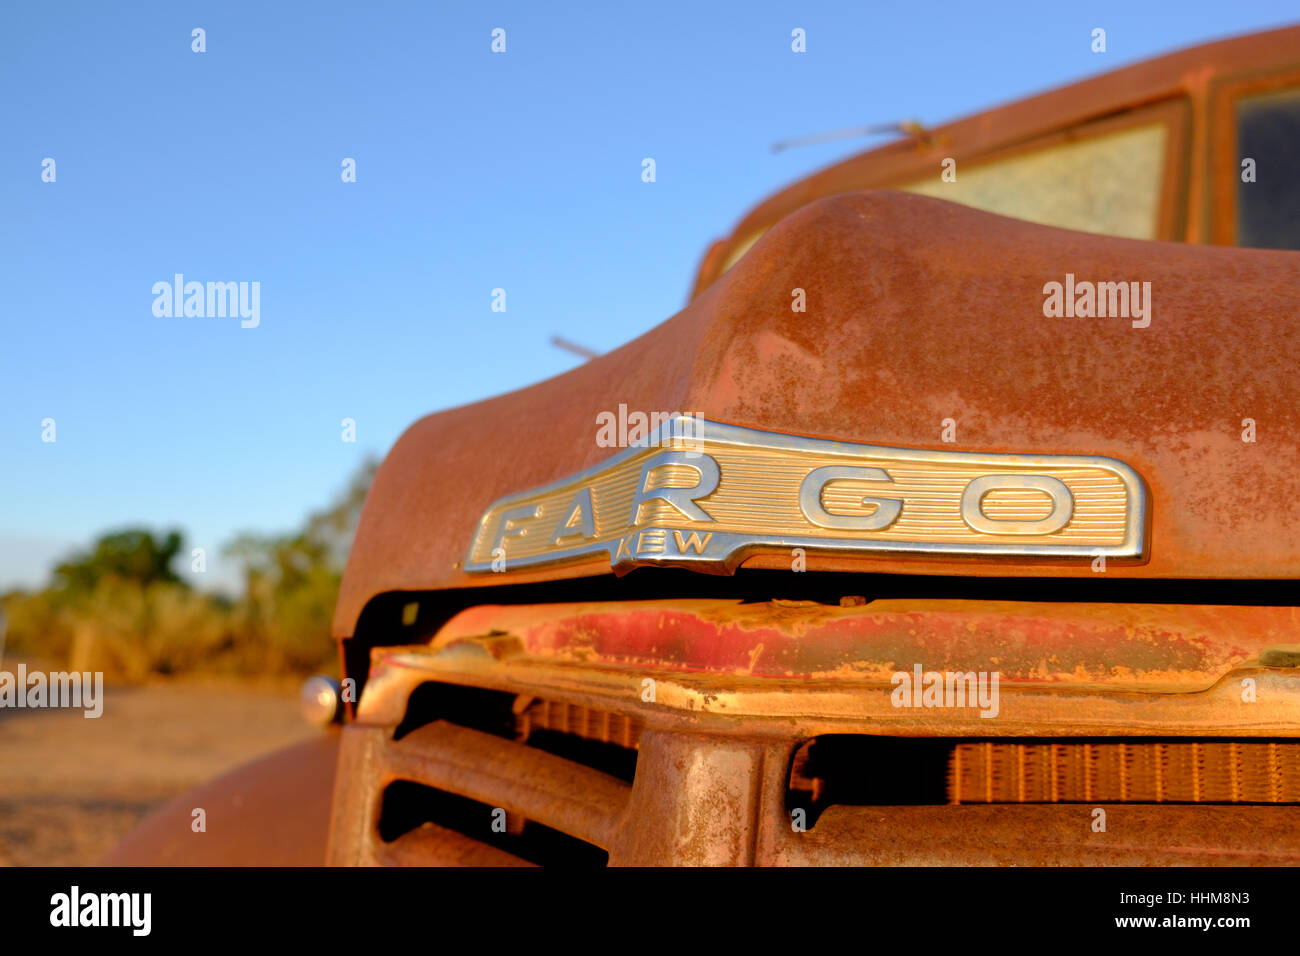 Rusty old wreck of a Fargo truck in early morning light, in a desert setting in the Australian outback Stock Photo